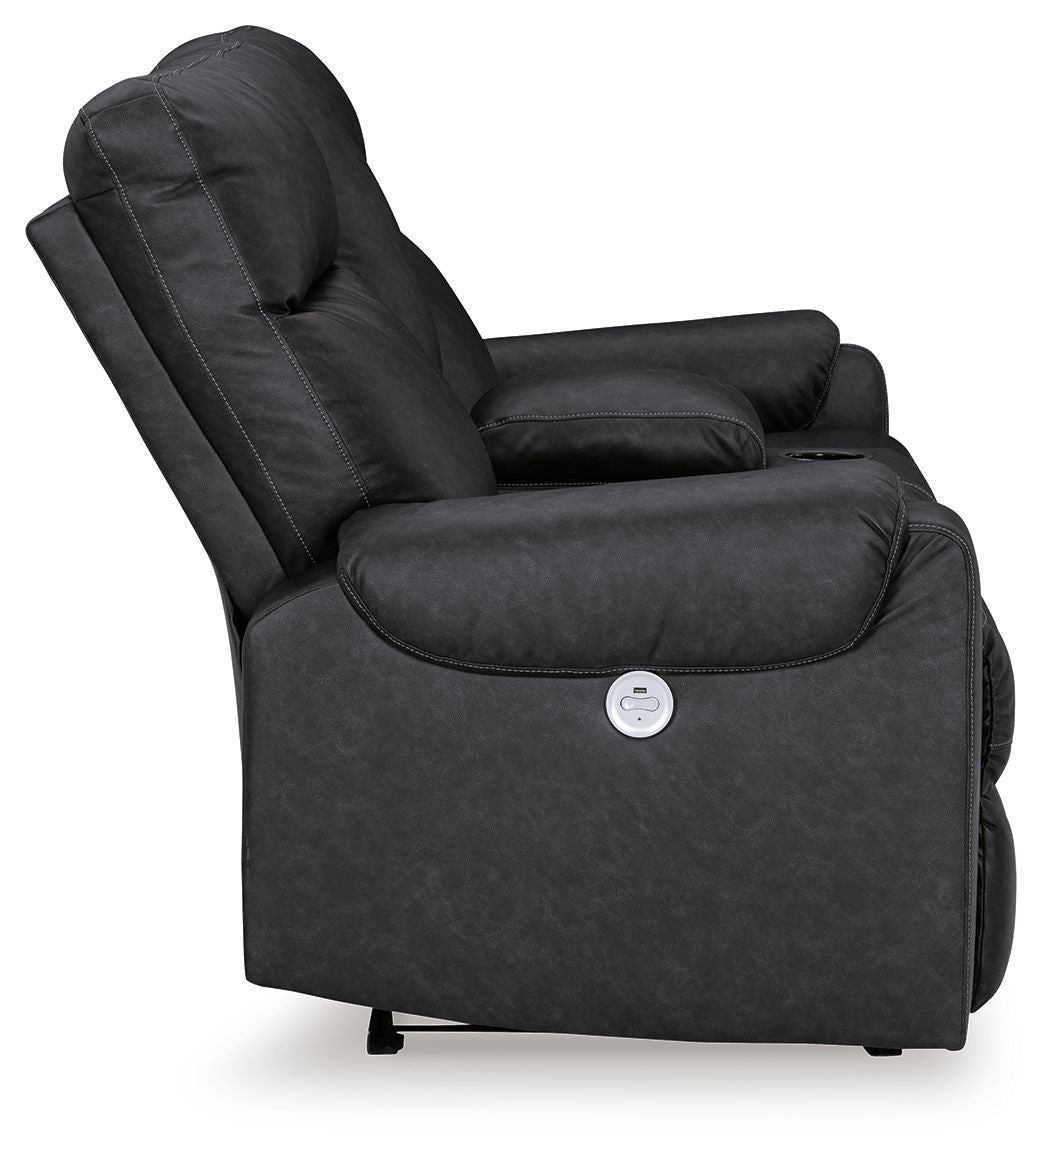 Axtellton - Carbon - Dbl Power Reclining Loveseat With Console - Faux Leather